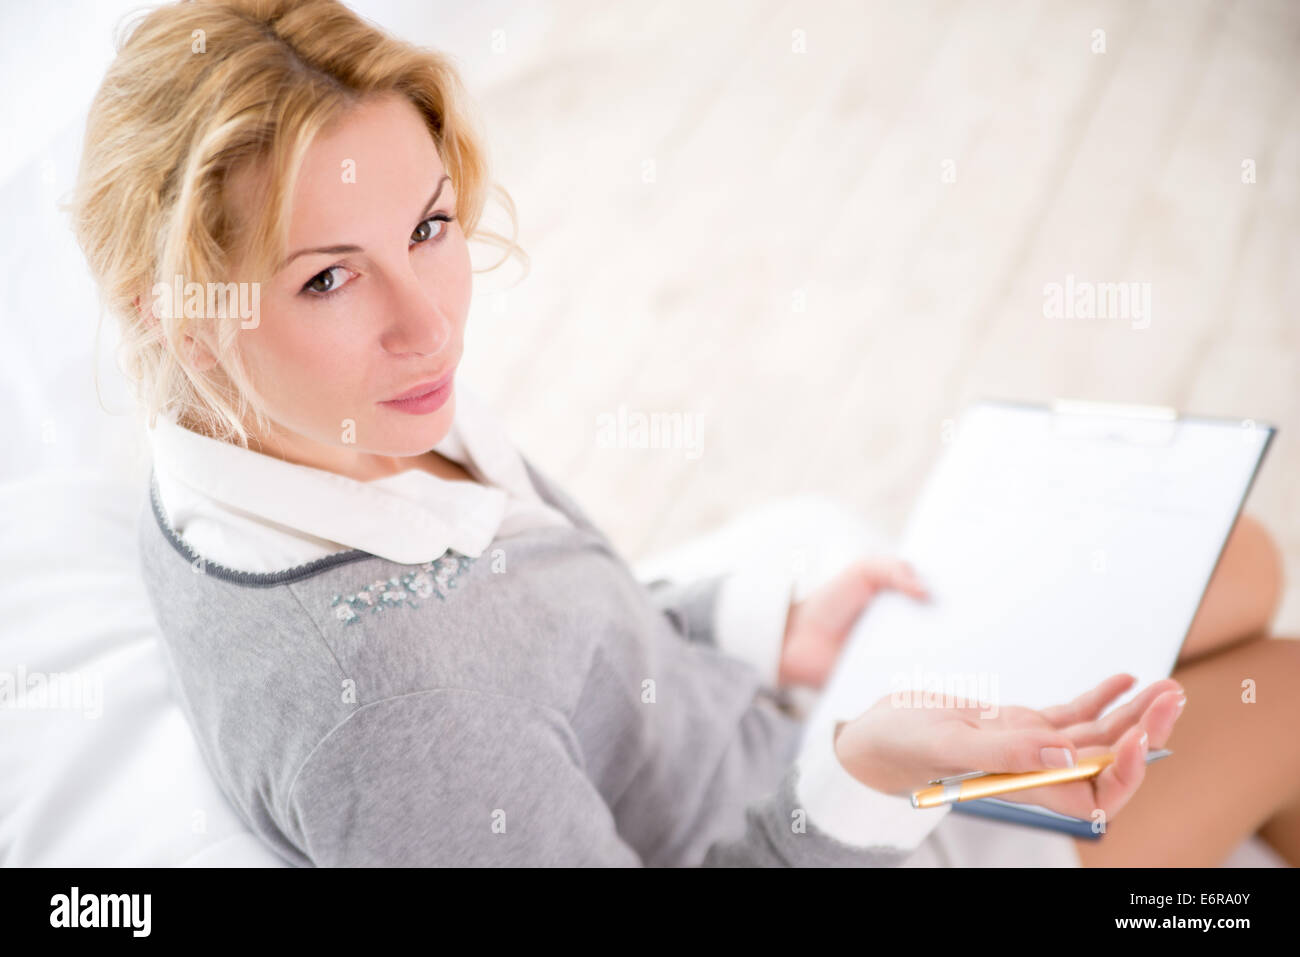 Professional psychiatrist looking at her patient during therapy session Stock Photo